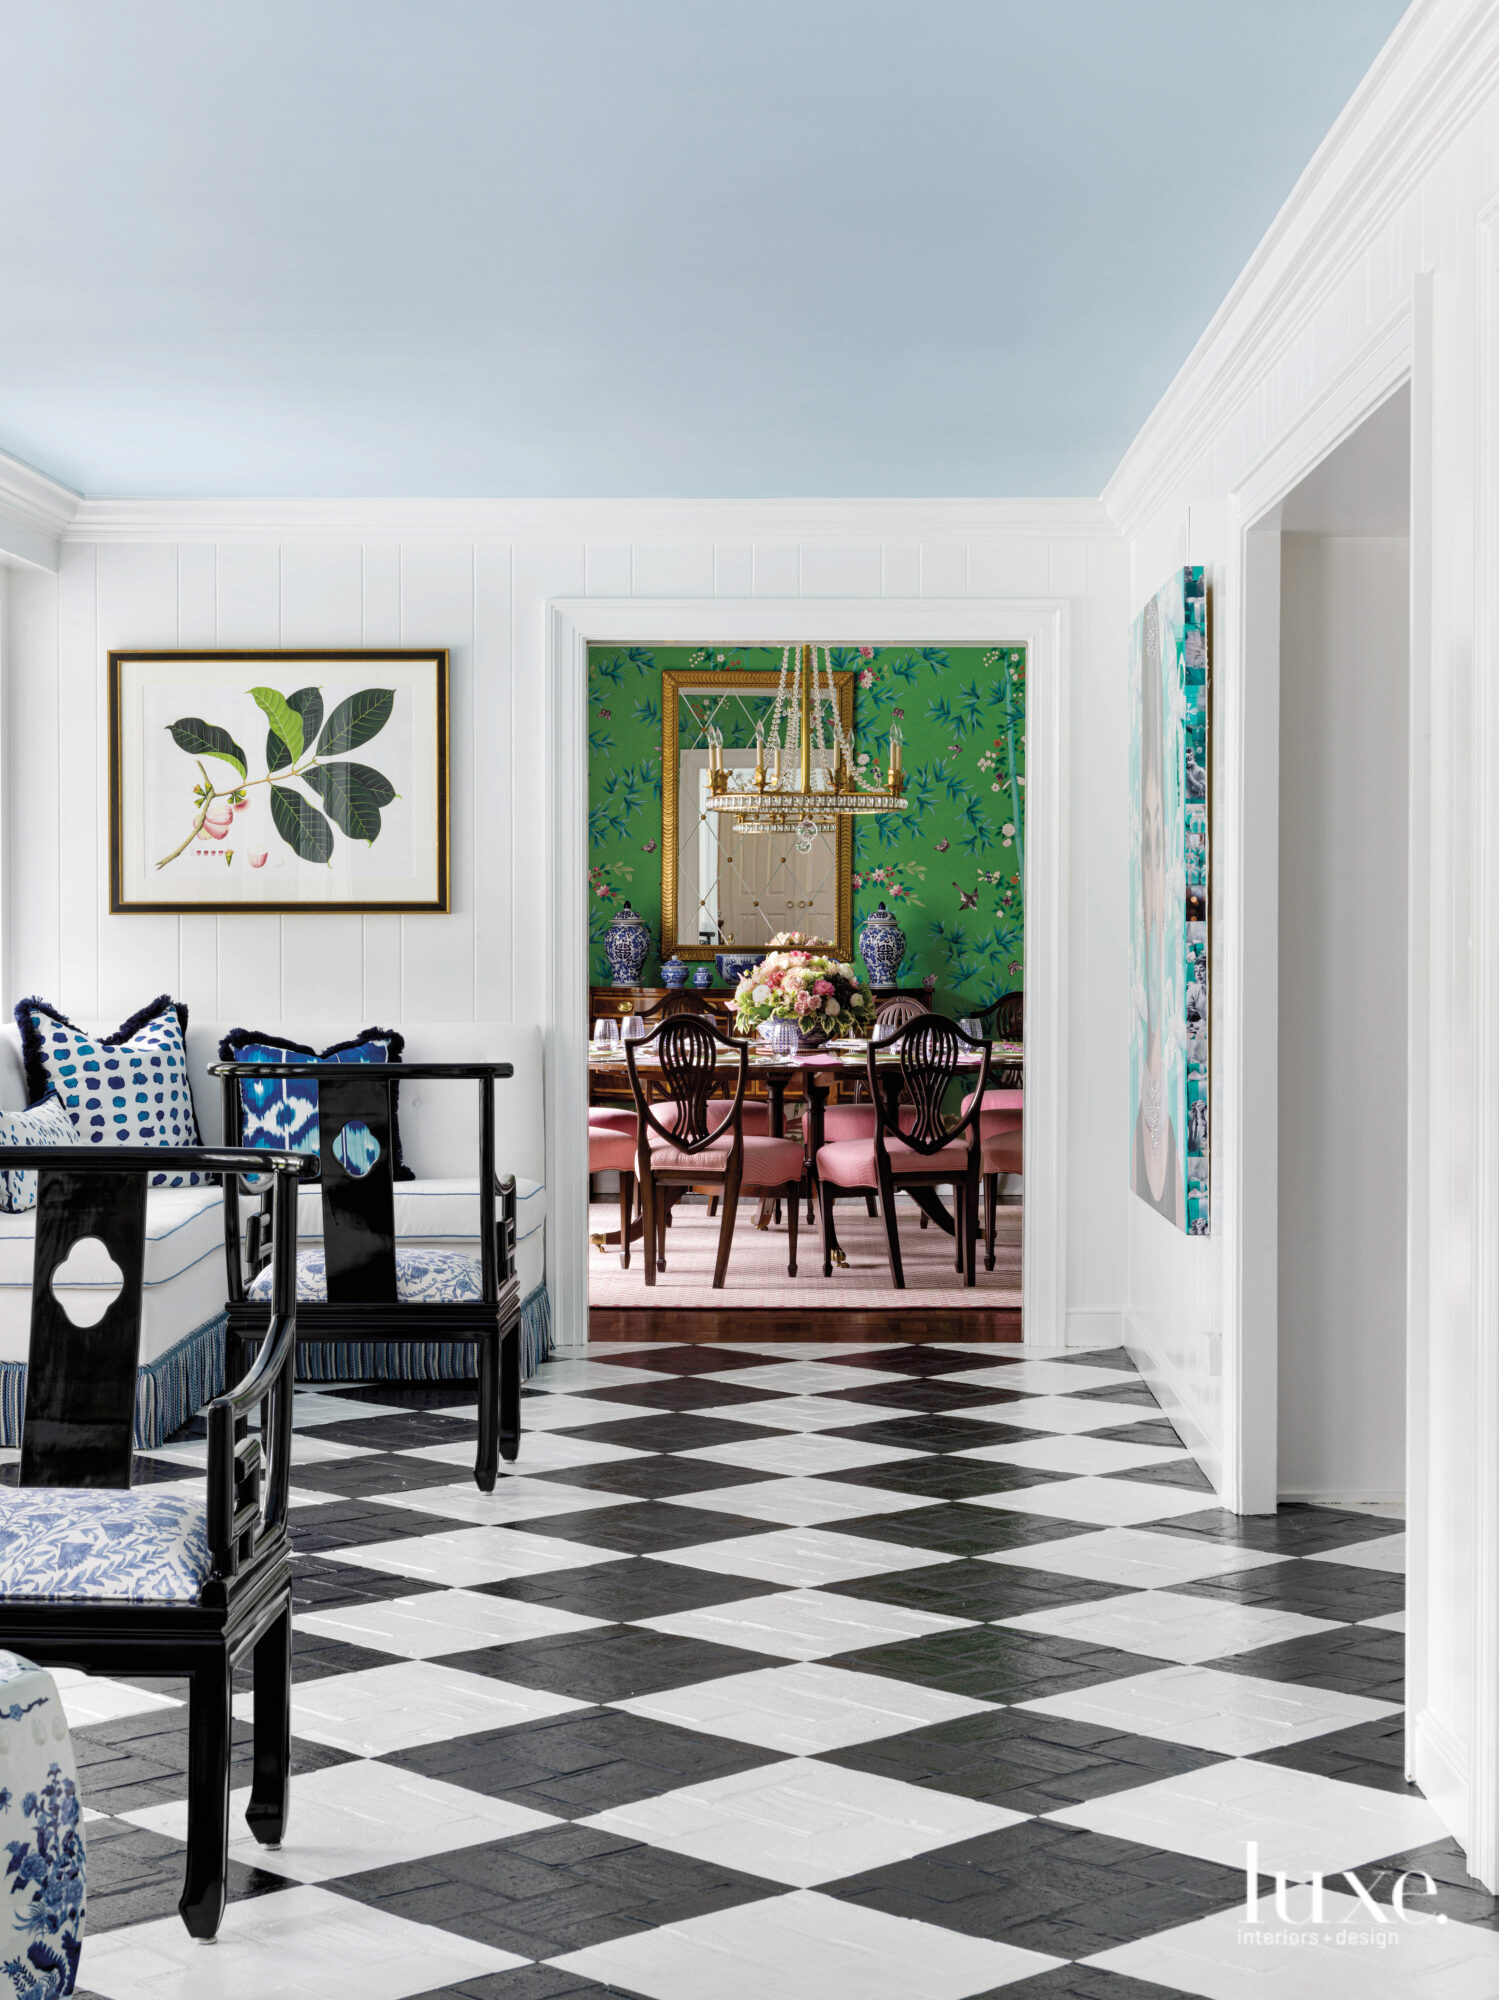 The sunporch has black-and-white floors and looks into the dining room.